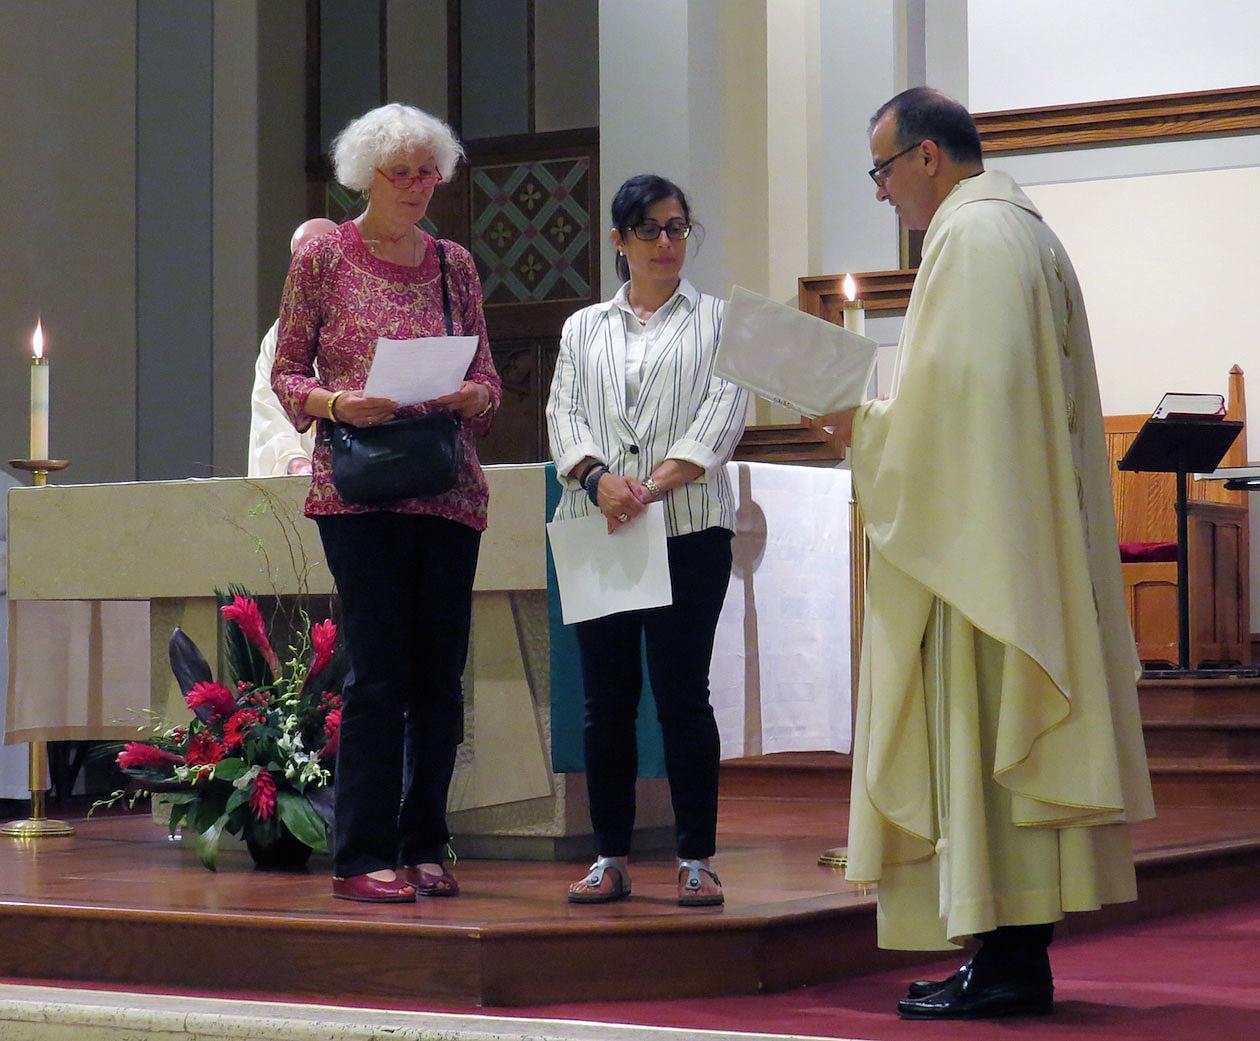 Inge Ali (left) and Angela Barbieri make their first promise as Paulist Associates received by Paulist President Father Eric Andrews.